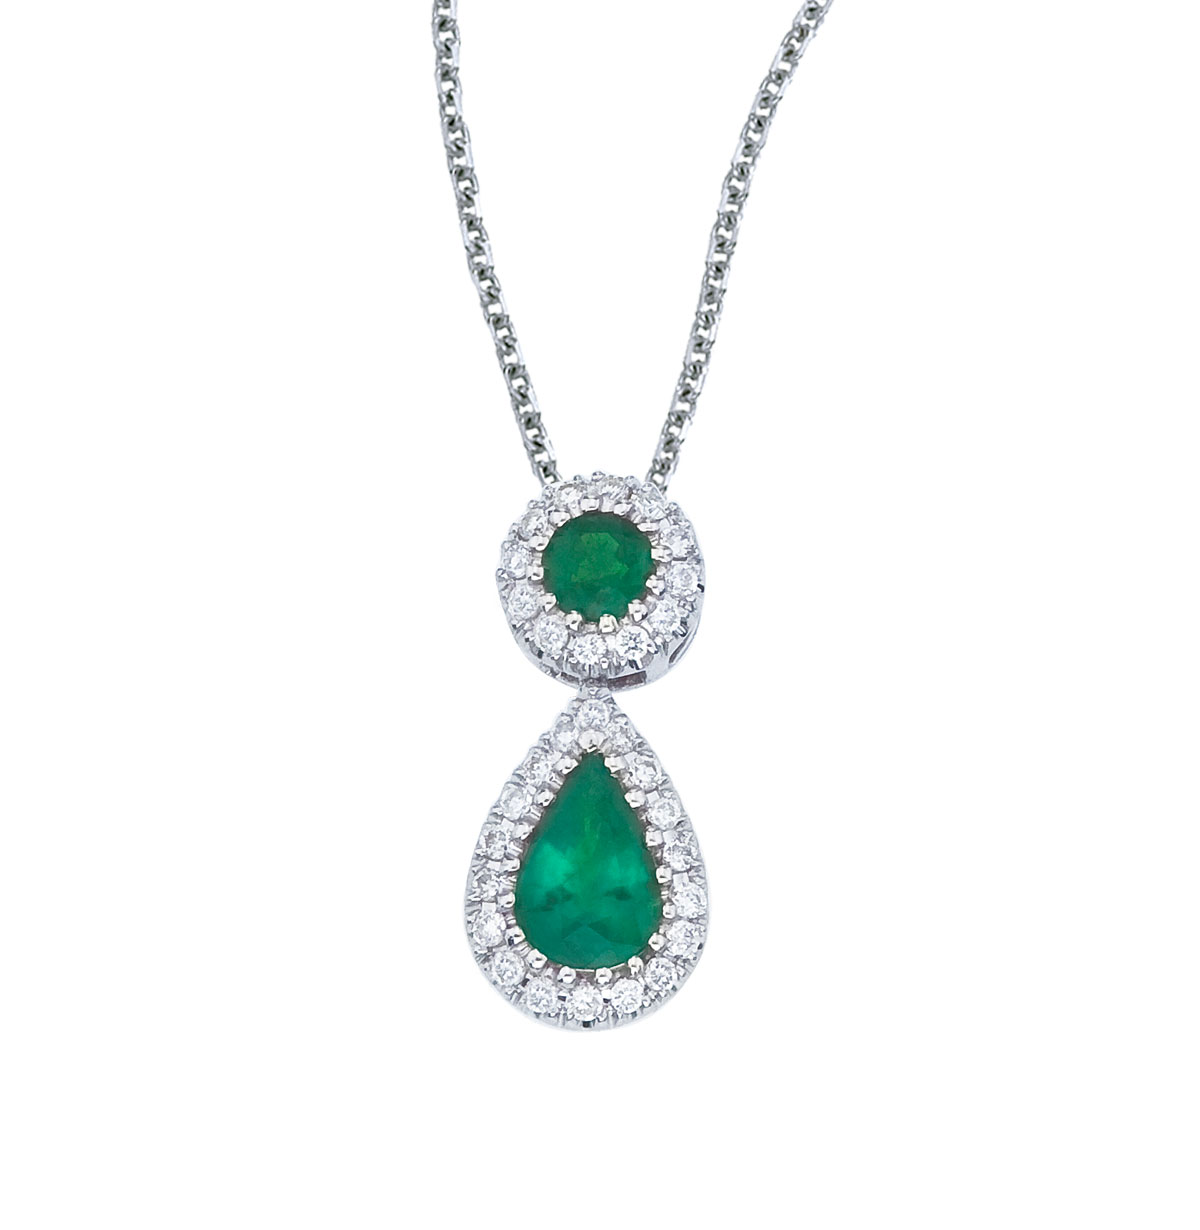 JCX2566: This beautiful 14k white gold pendant features a 6x4 mm emerald dangling from a 2.5 mm round emerald  all surrounded by .12 carats of shimmering diamonds.